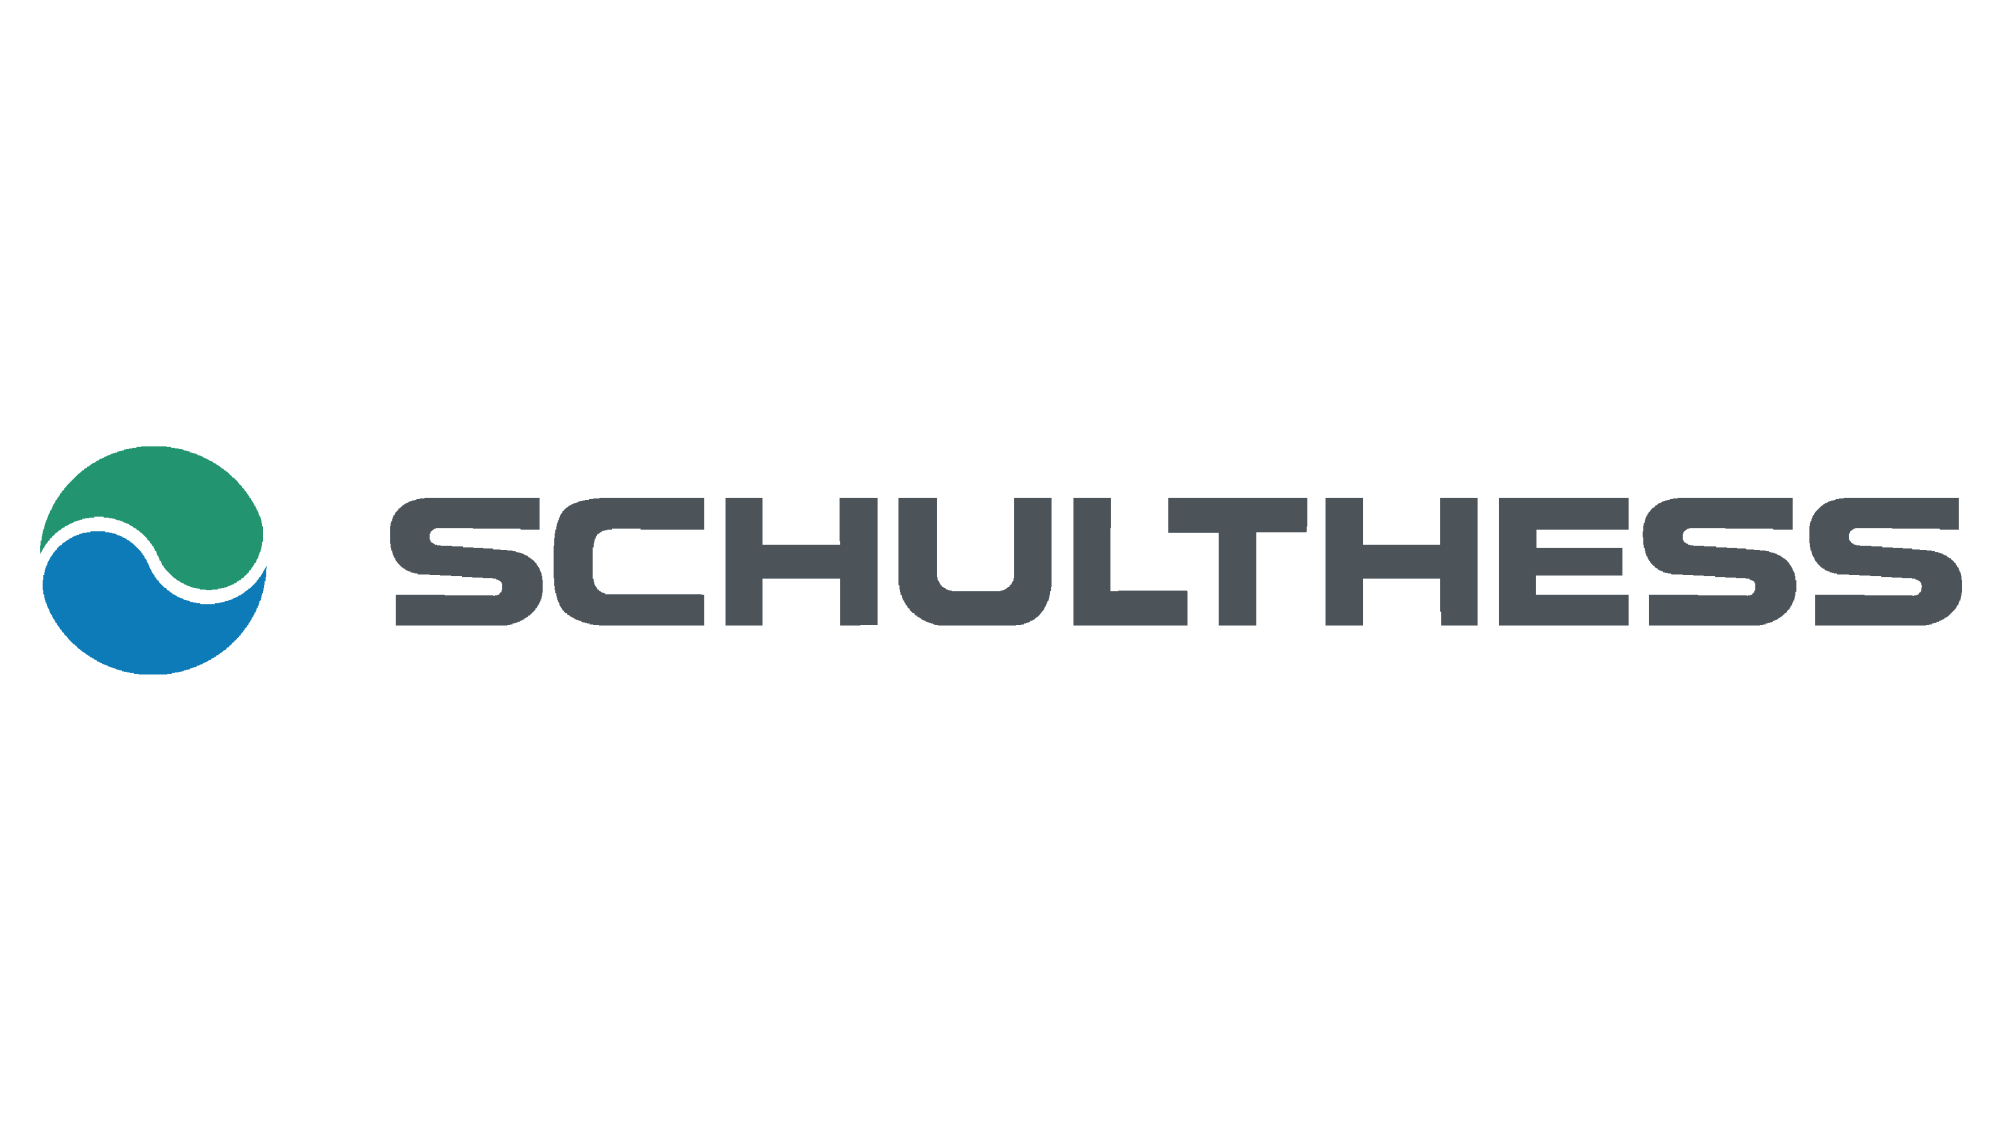 Schulthess